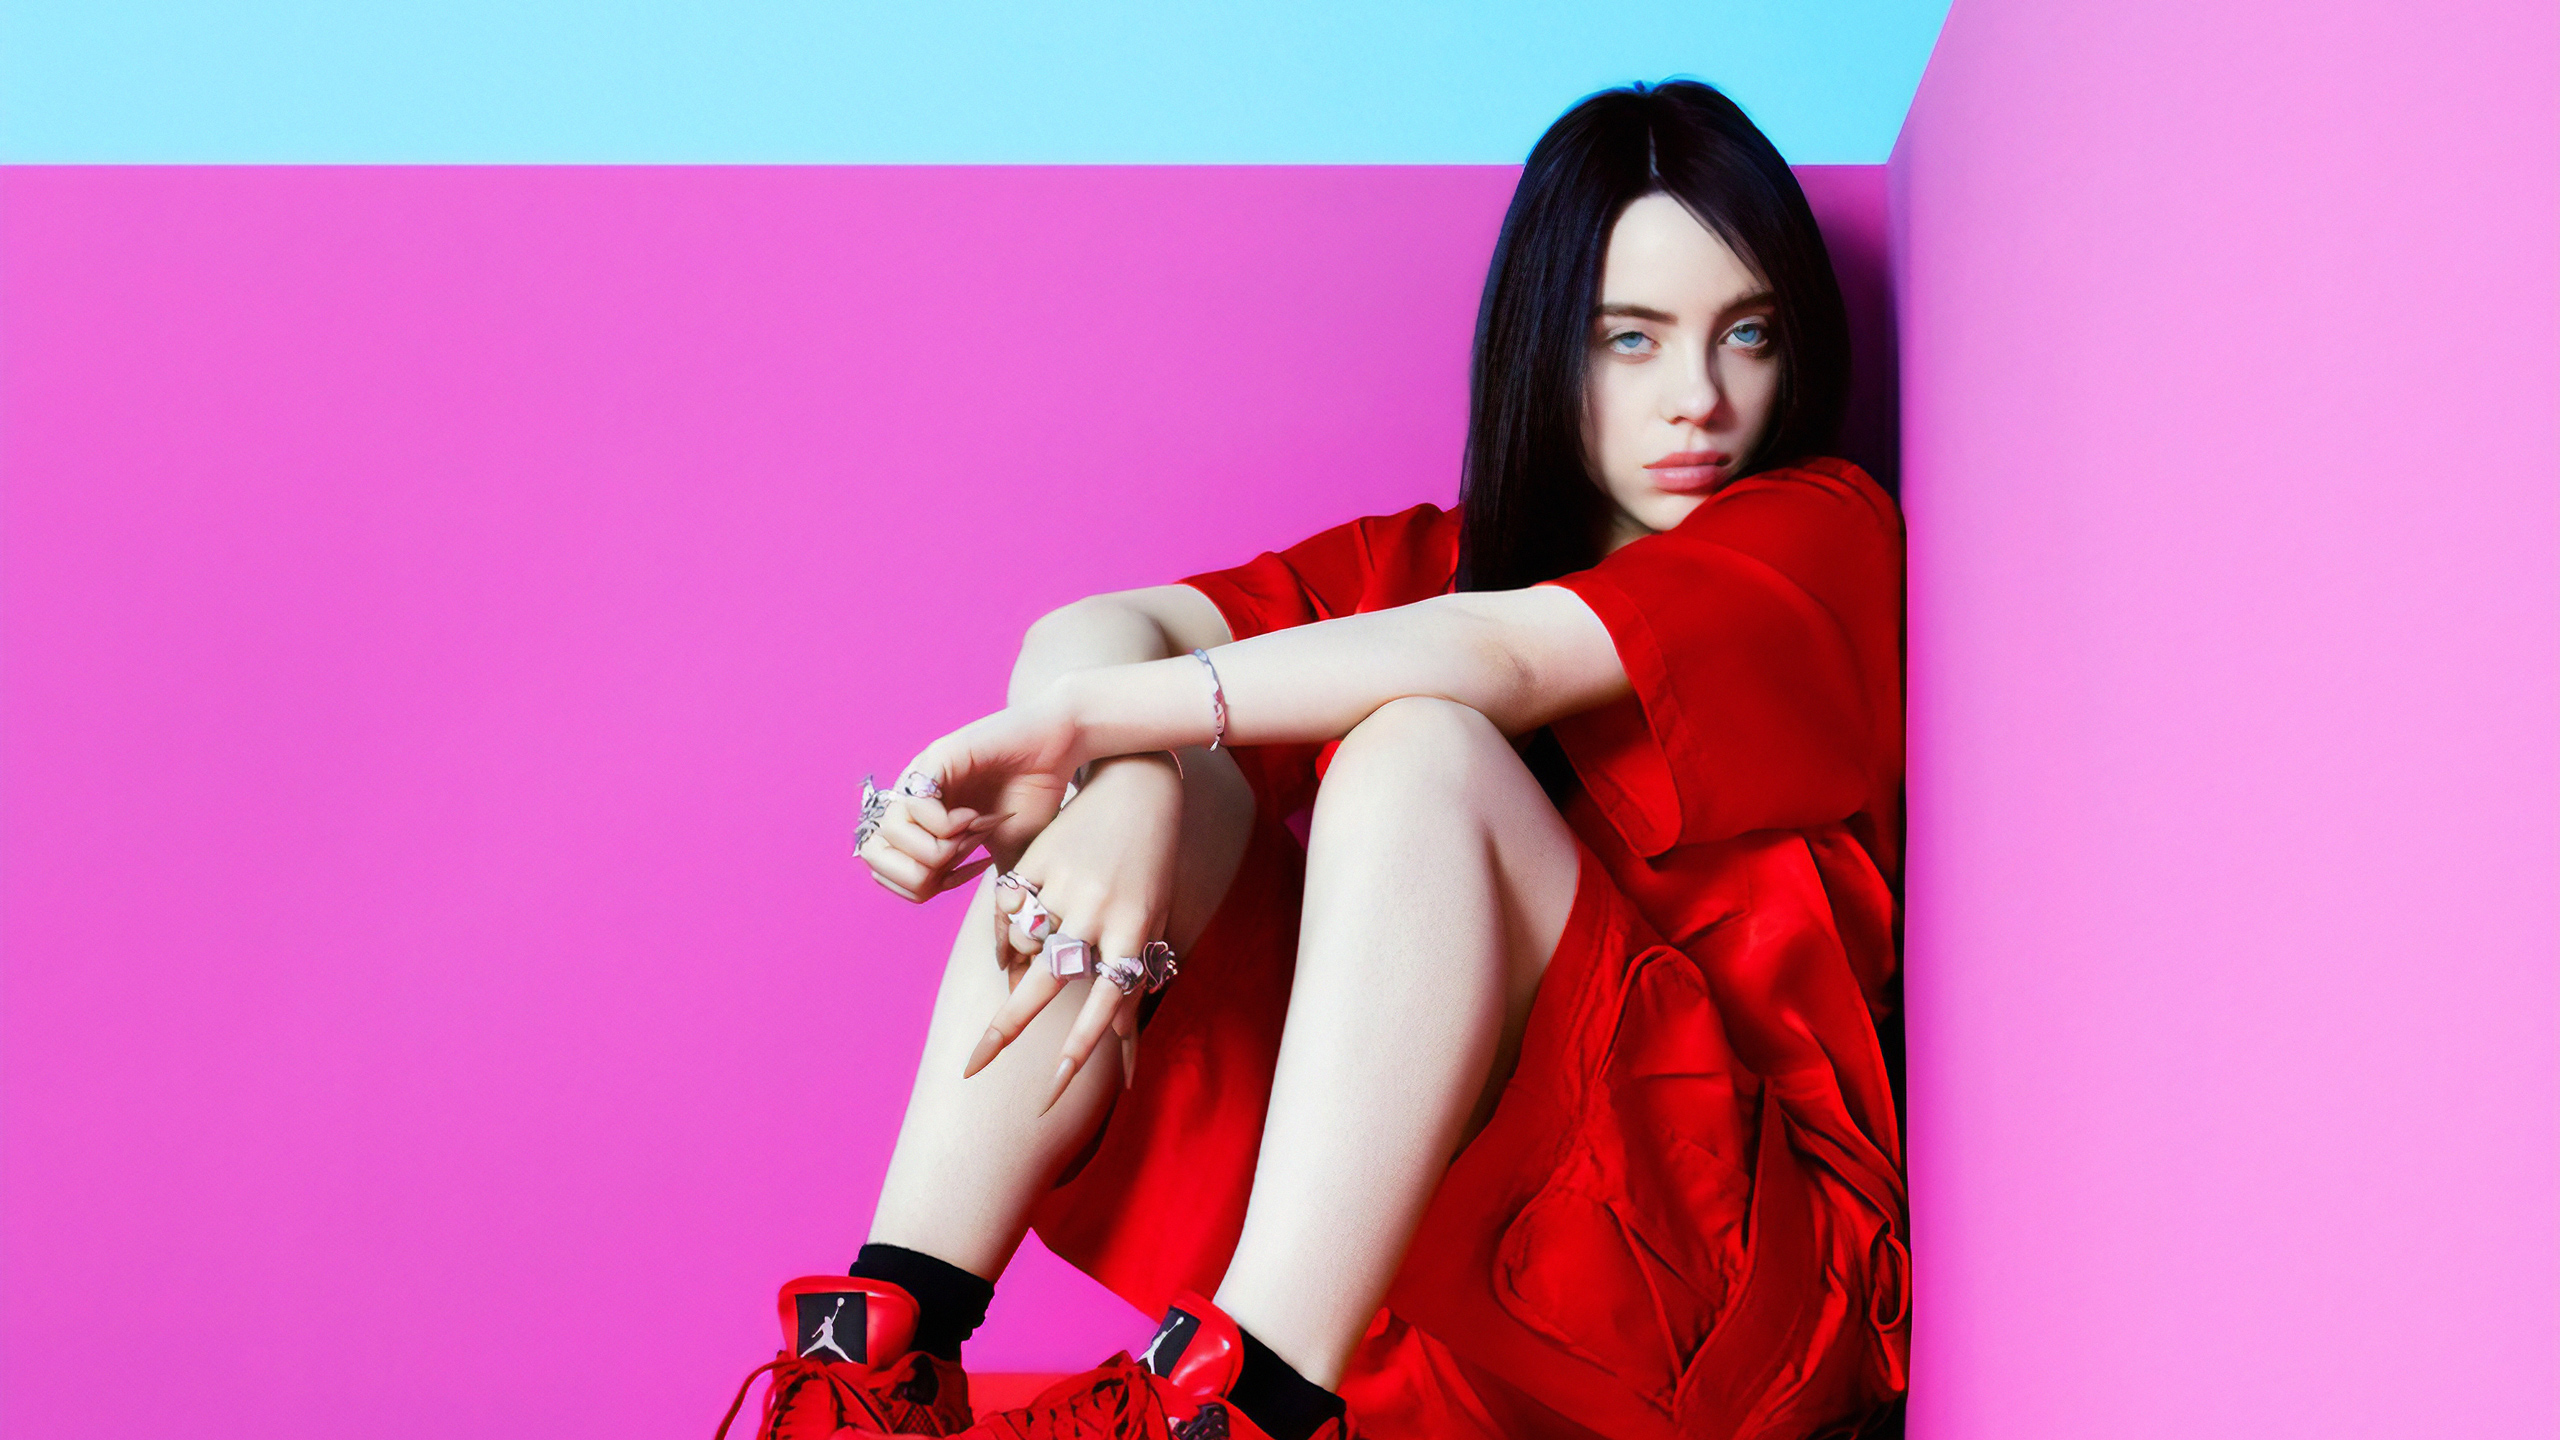 1152x864 Billie Eilish Times Magazine 19 1152x864 Resolution Hd 4k Wallpapers Images Backgrounds Photos And Pictures